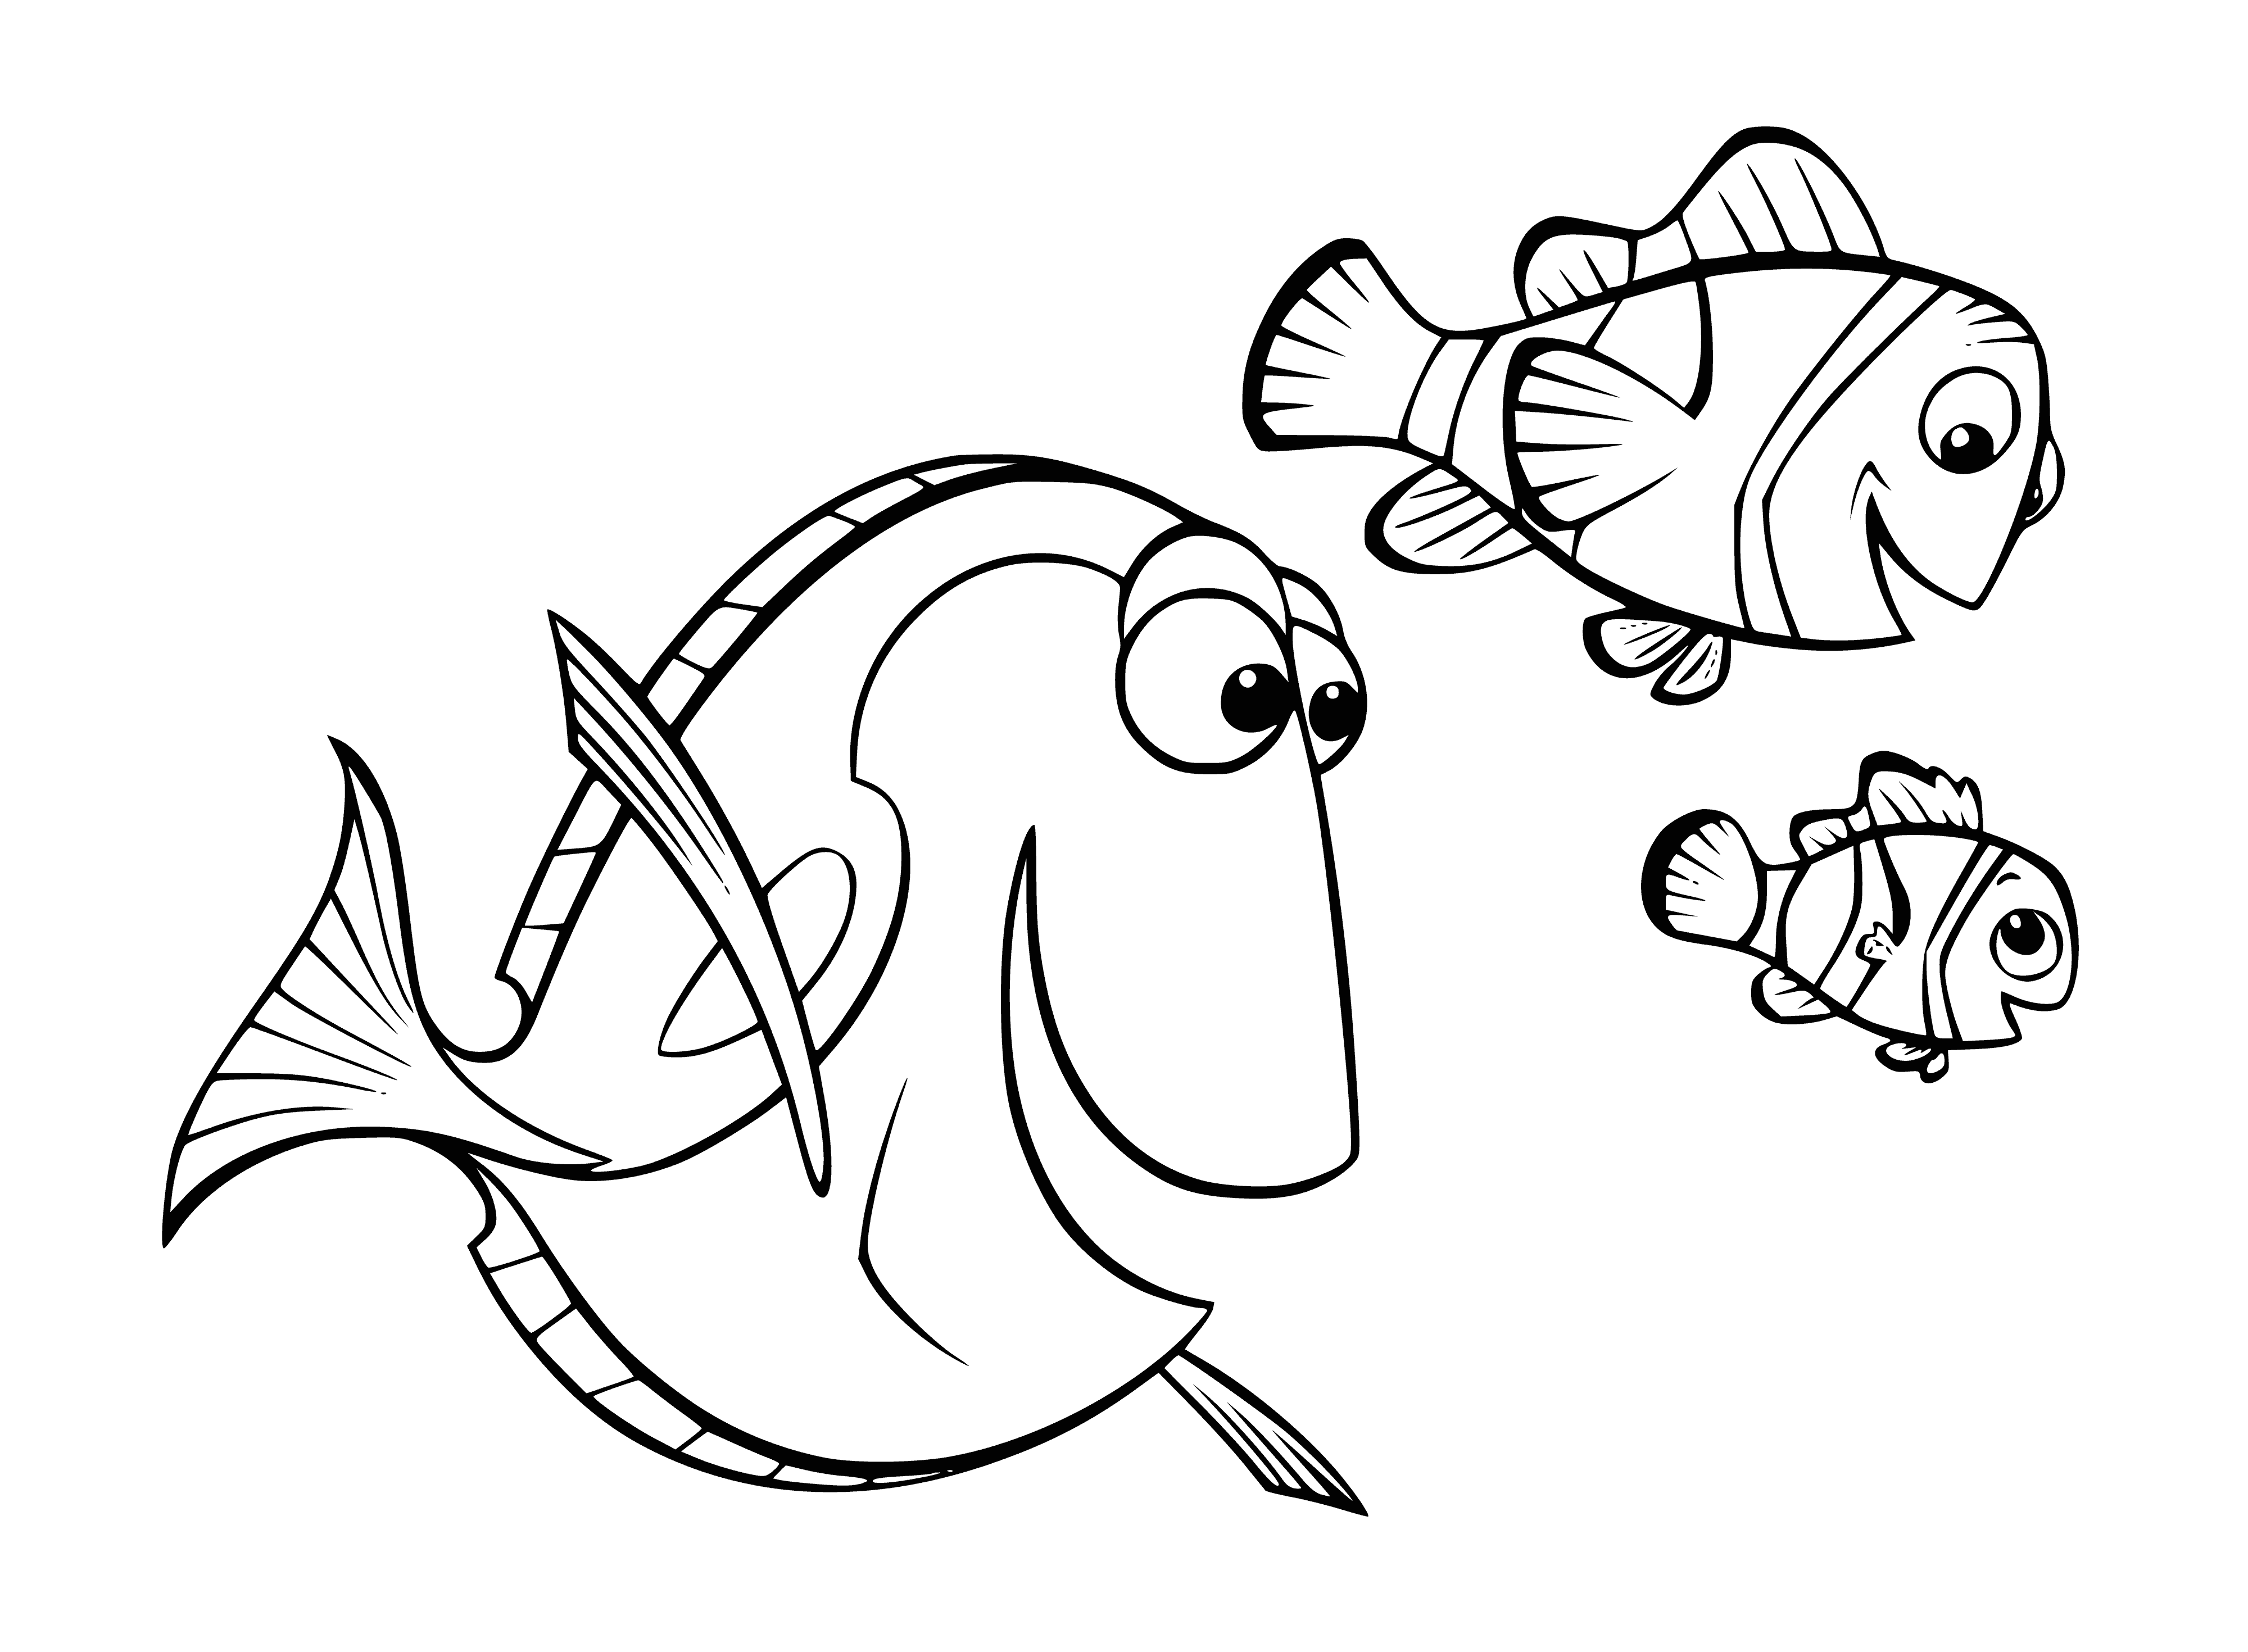 coloring page: Two bottlenose dolphins: 1 long, thin; 1 short, wide. Both gray/white, mouths open.